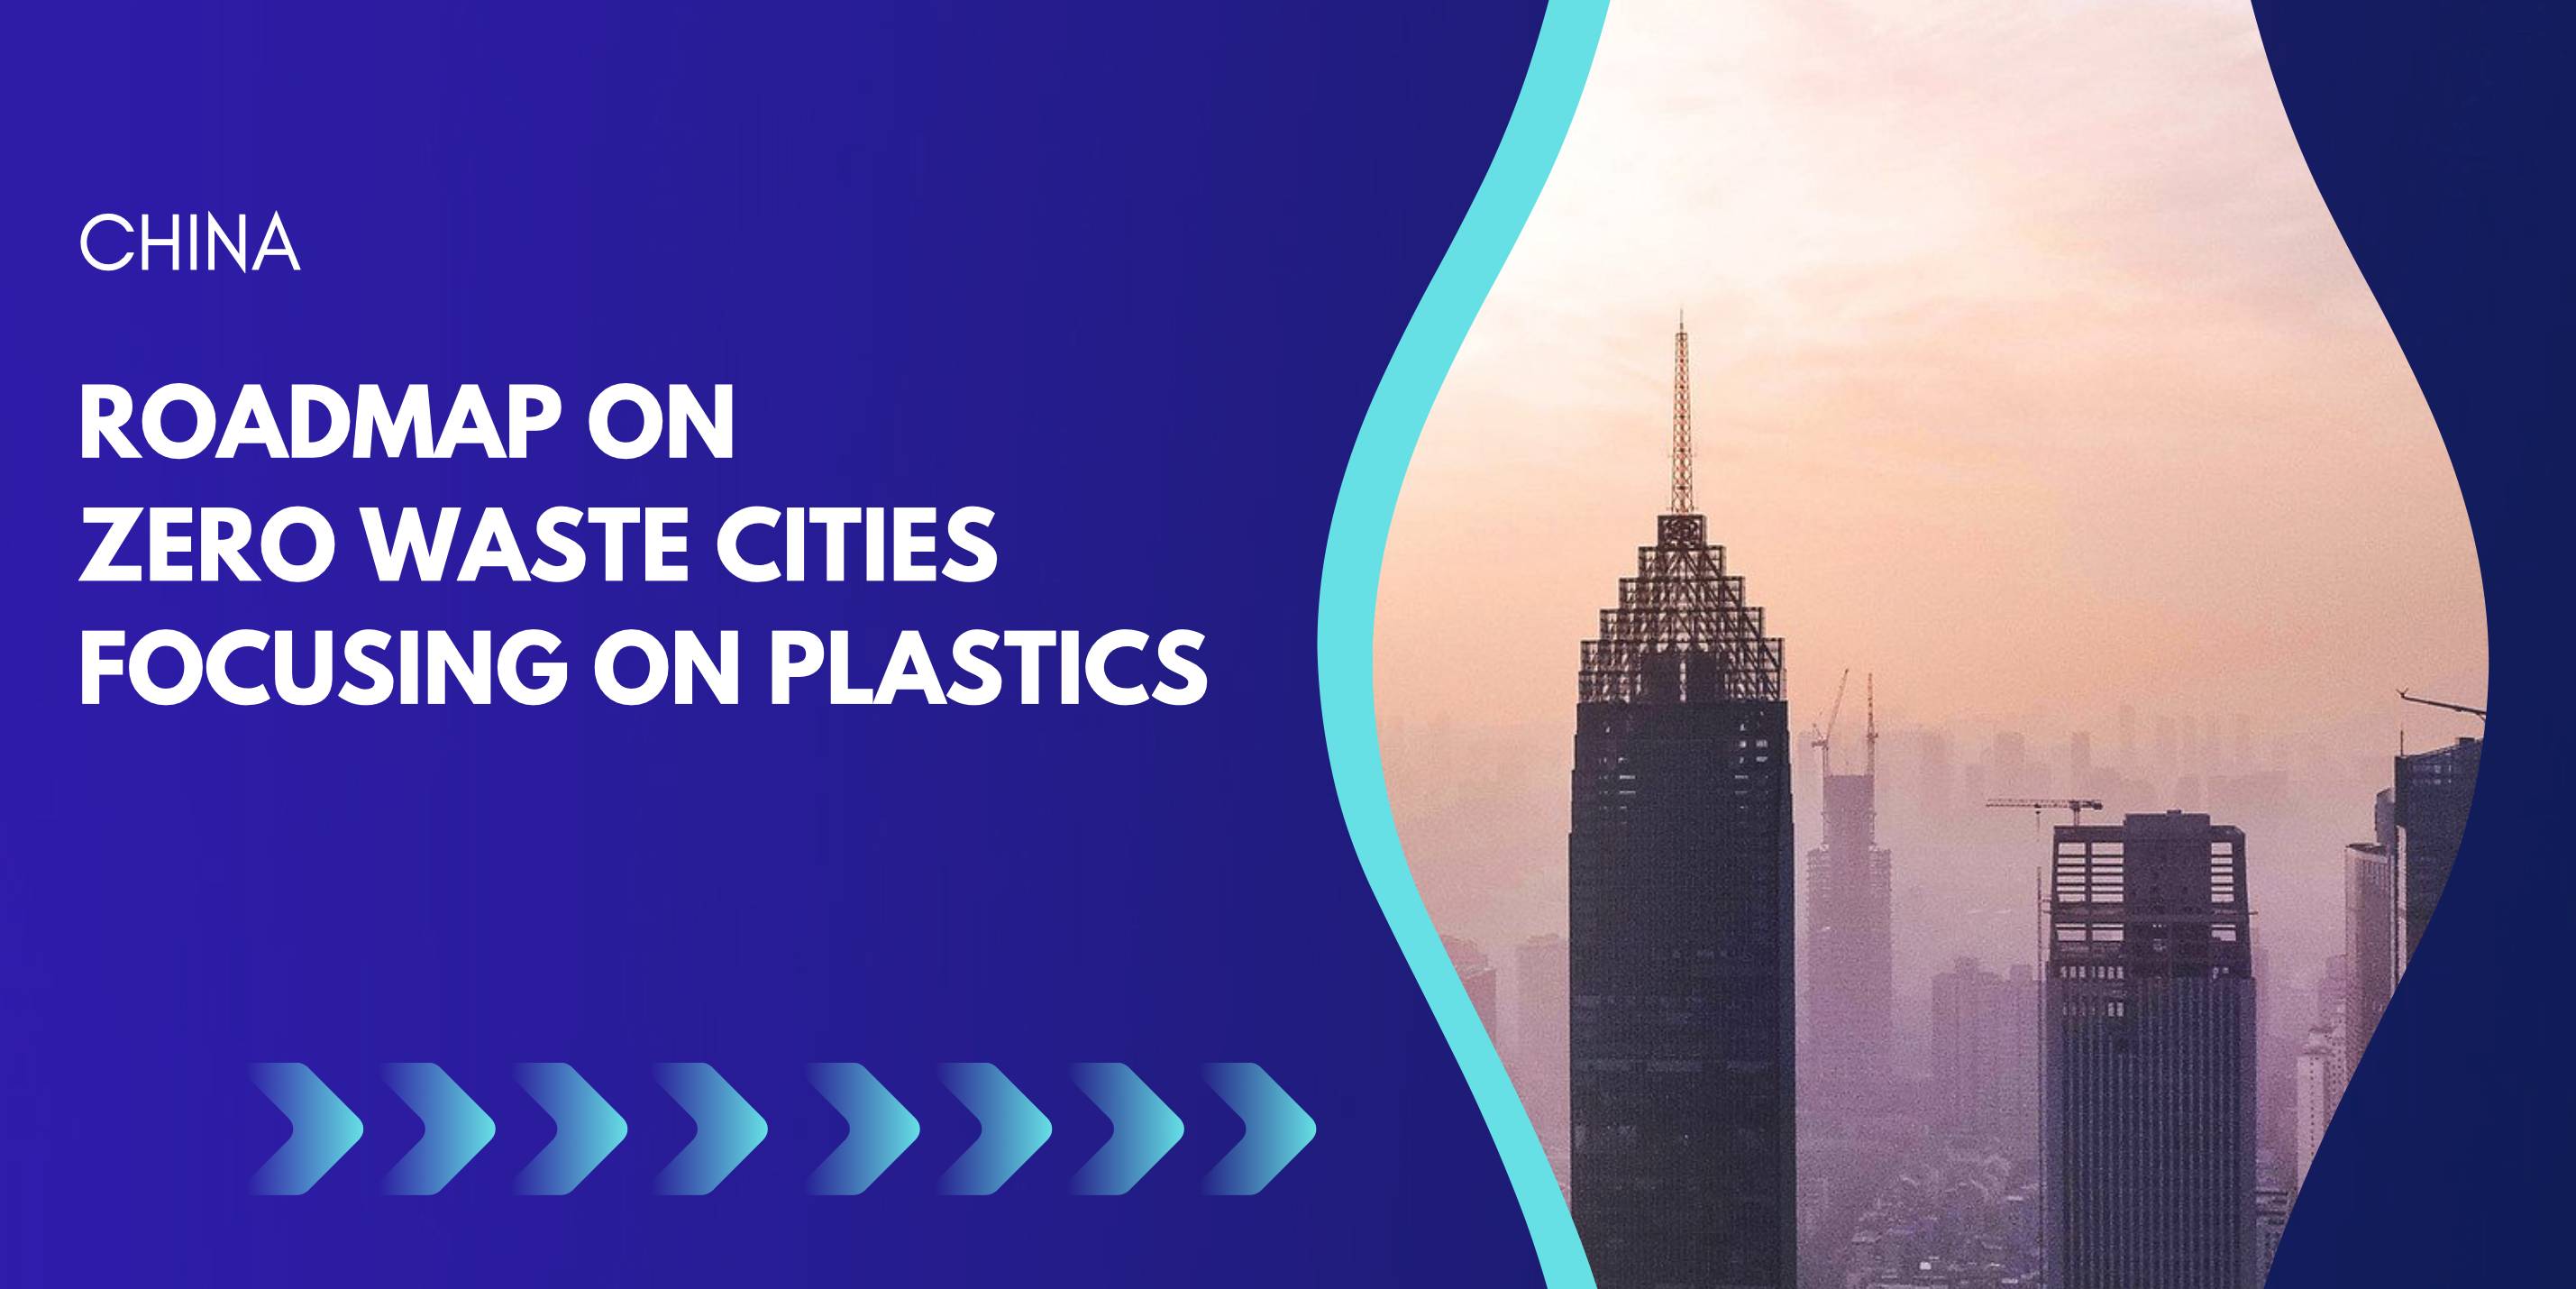 SWITCH-Asia Supports China in Developing Roadmap on Zero Waste Cities focusing on Plastics